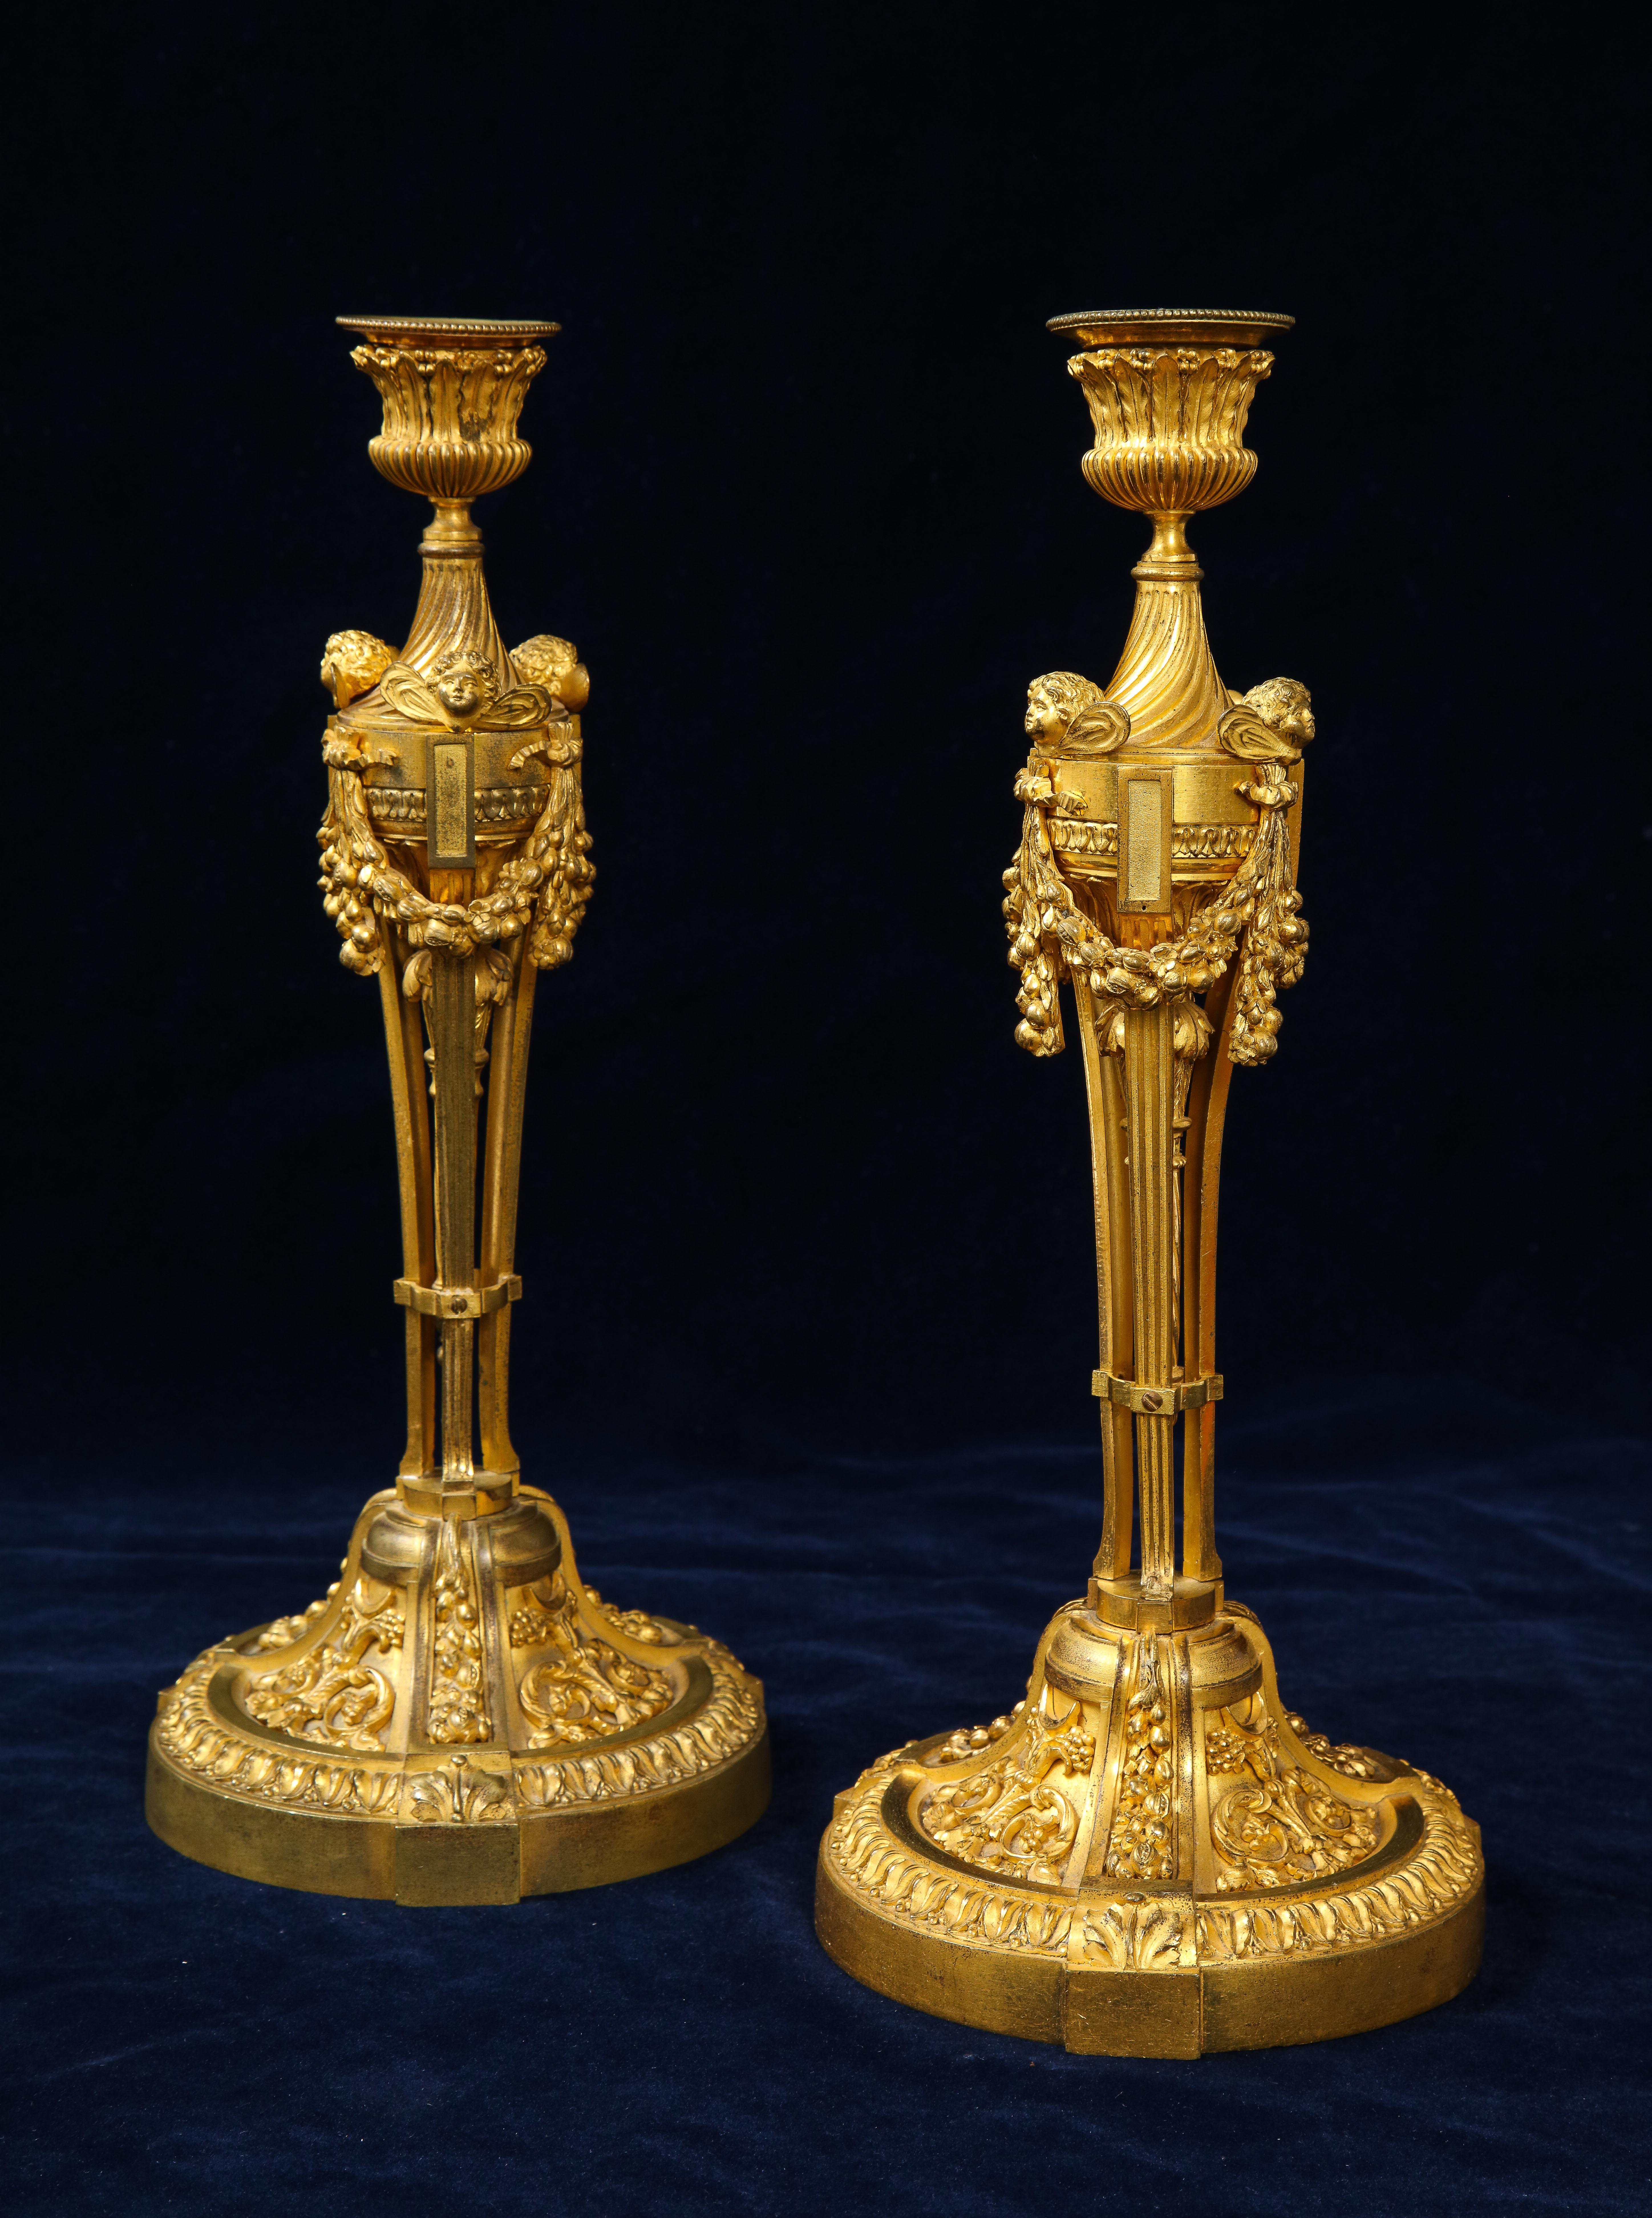 A spectacular pair of French Louis XVI ormolu candlesticks with Putti Masks and Garlands. The socket is very intricately sculpted with beading, acanthus leaves, and fluted bottom. Beneath the socket and down a swirling fluted neck, three putti masks